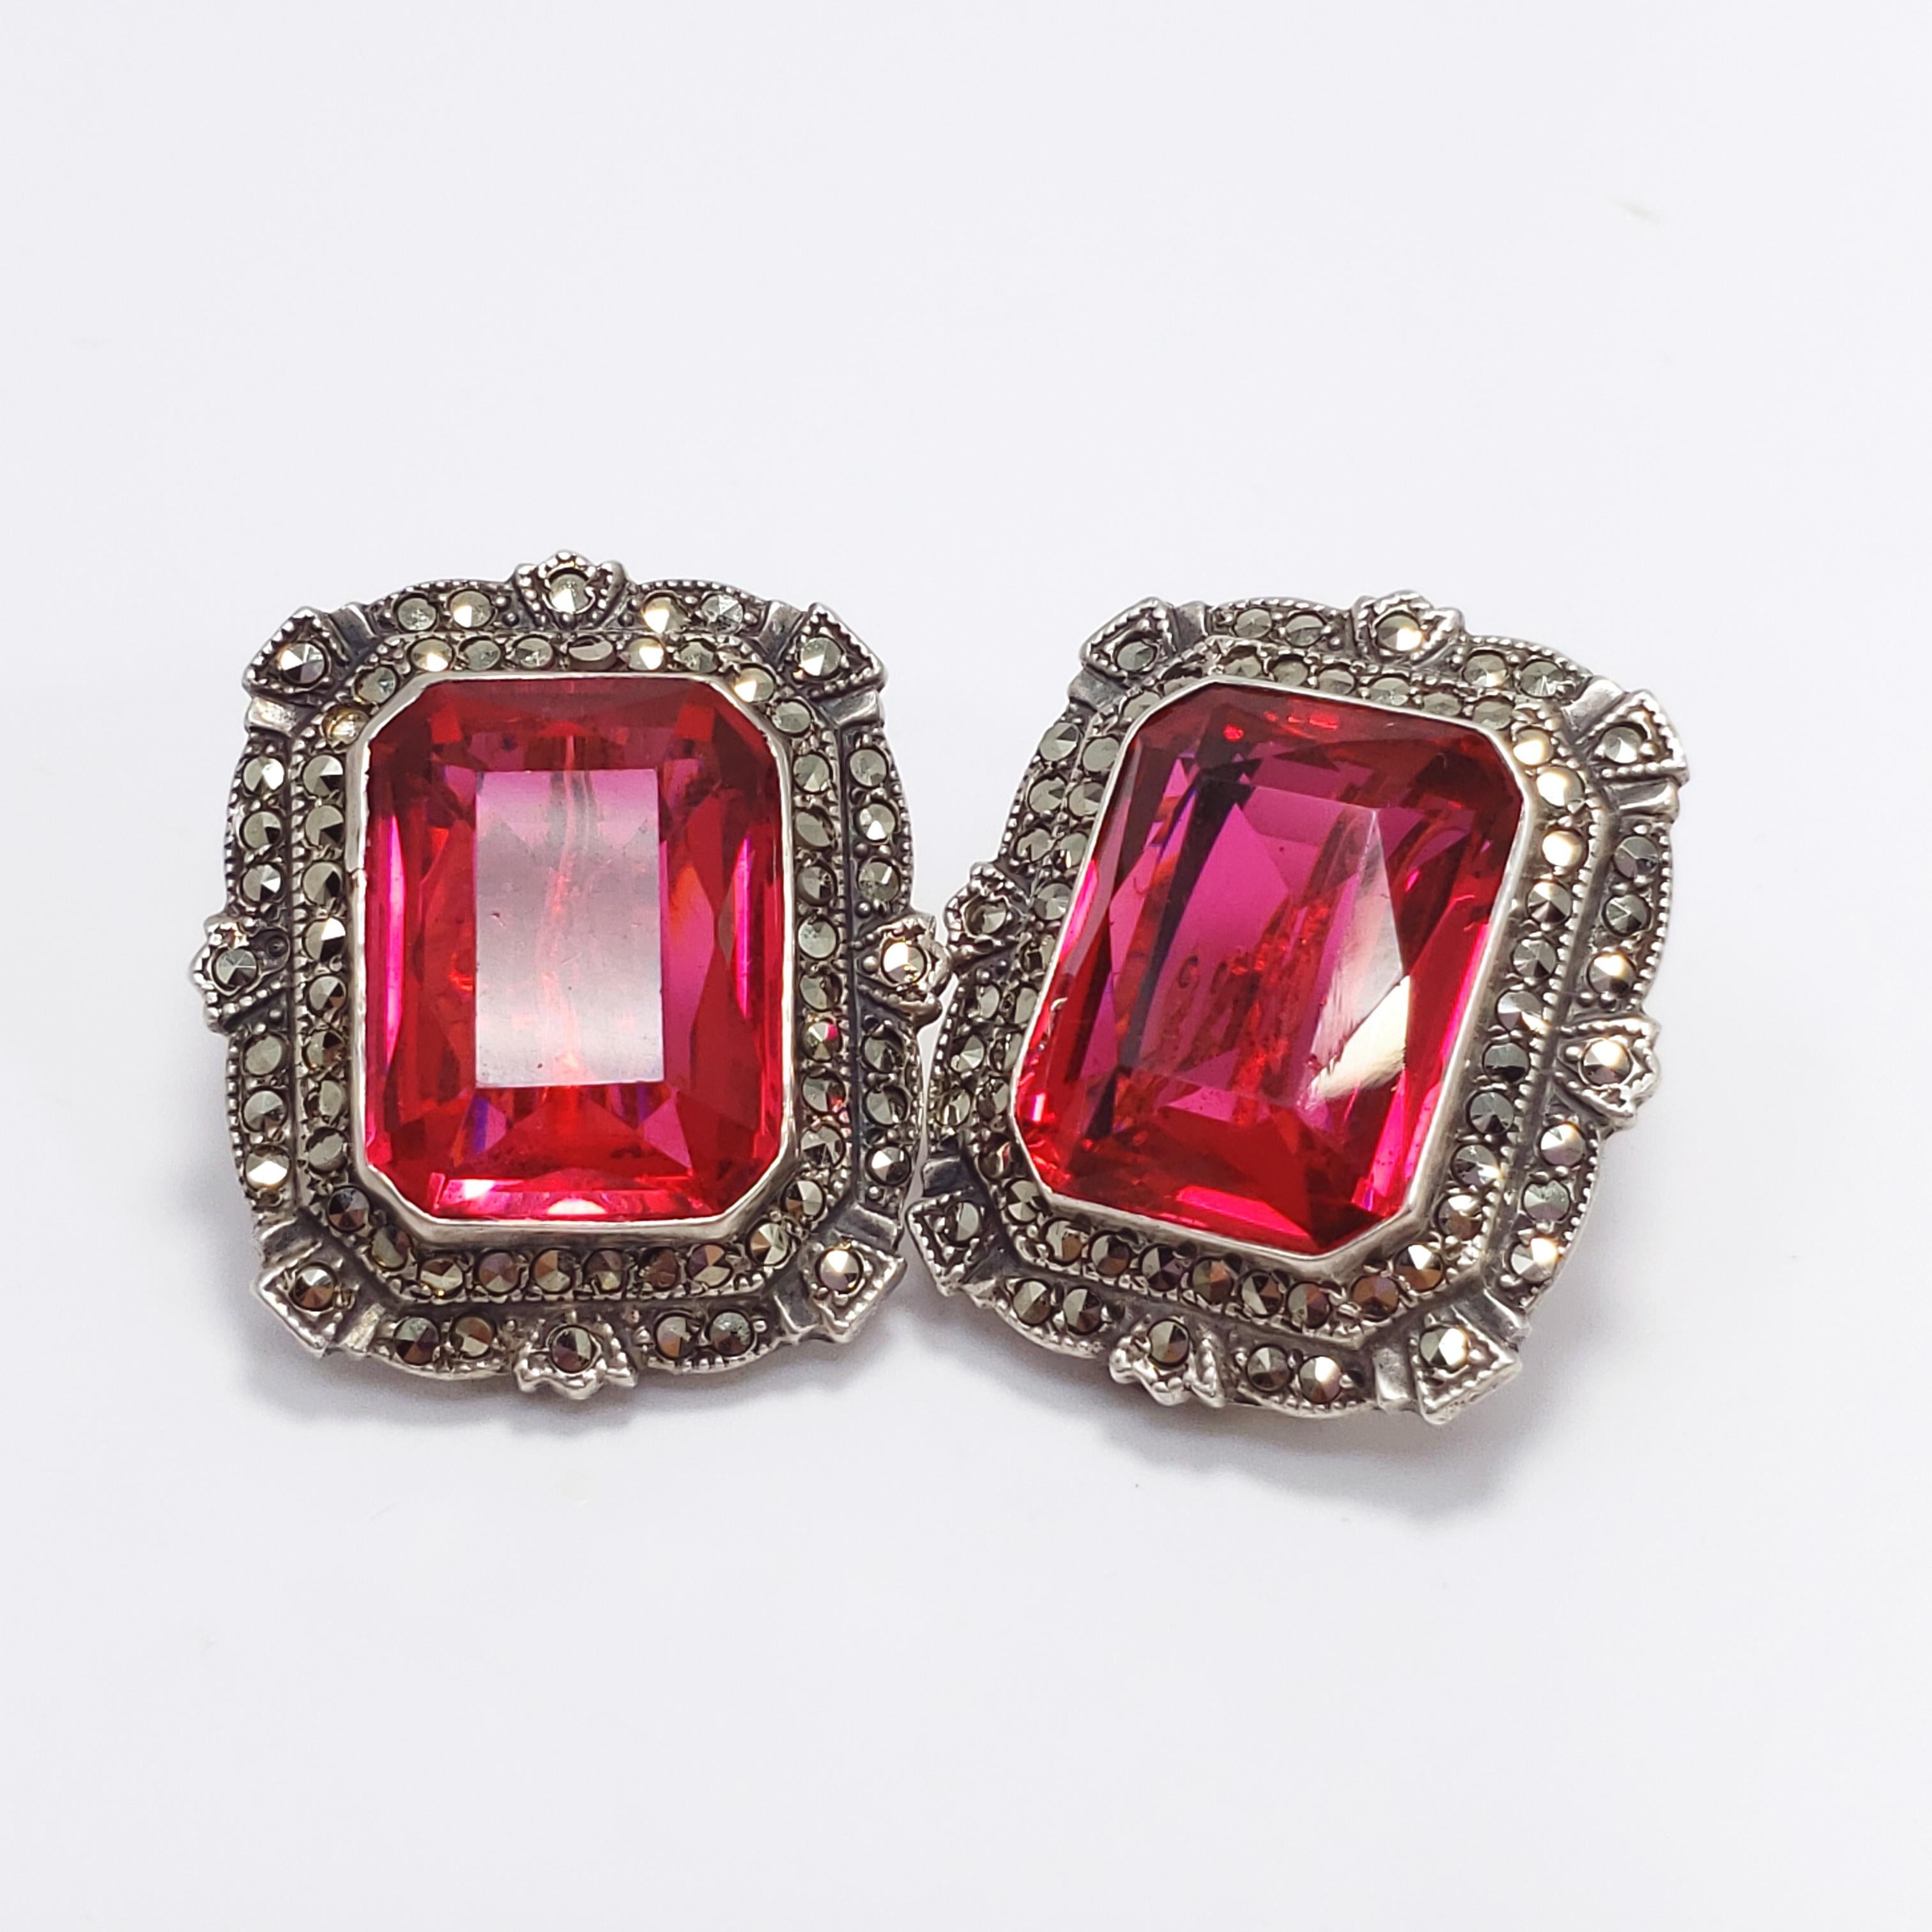 This is a regal-looking pair of earrings from circa late 1880s to early 1900s, with clear Victorian and Art Deco influence. Each earring features a large and bold ruby-colored, open back crystal set in an ornate sterling silver setting. Faceted